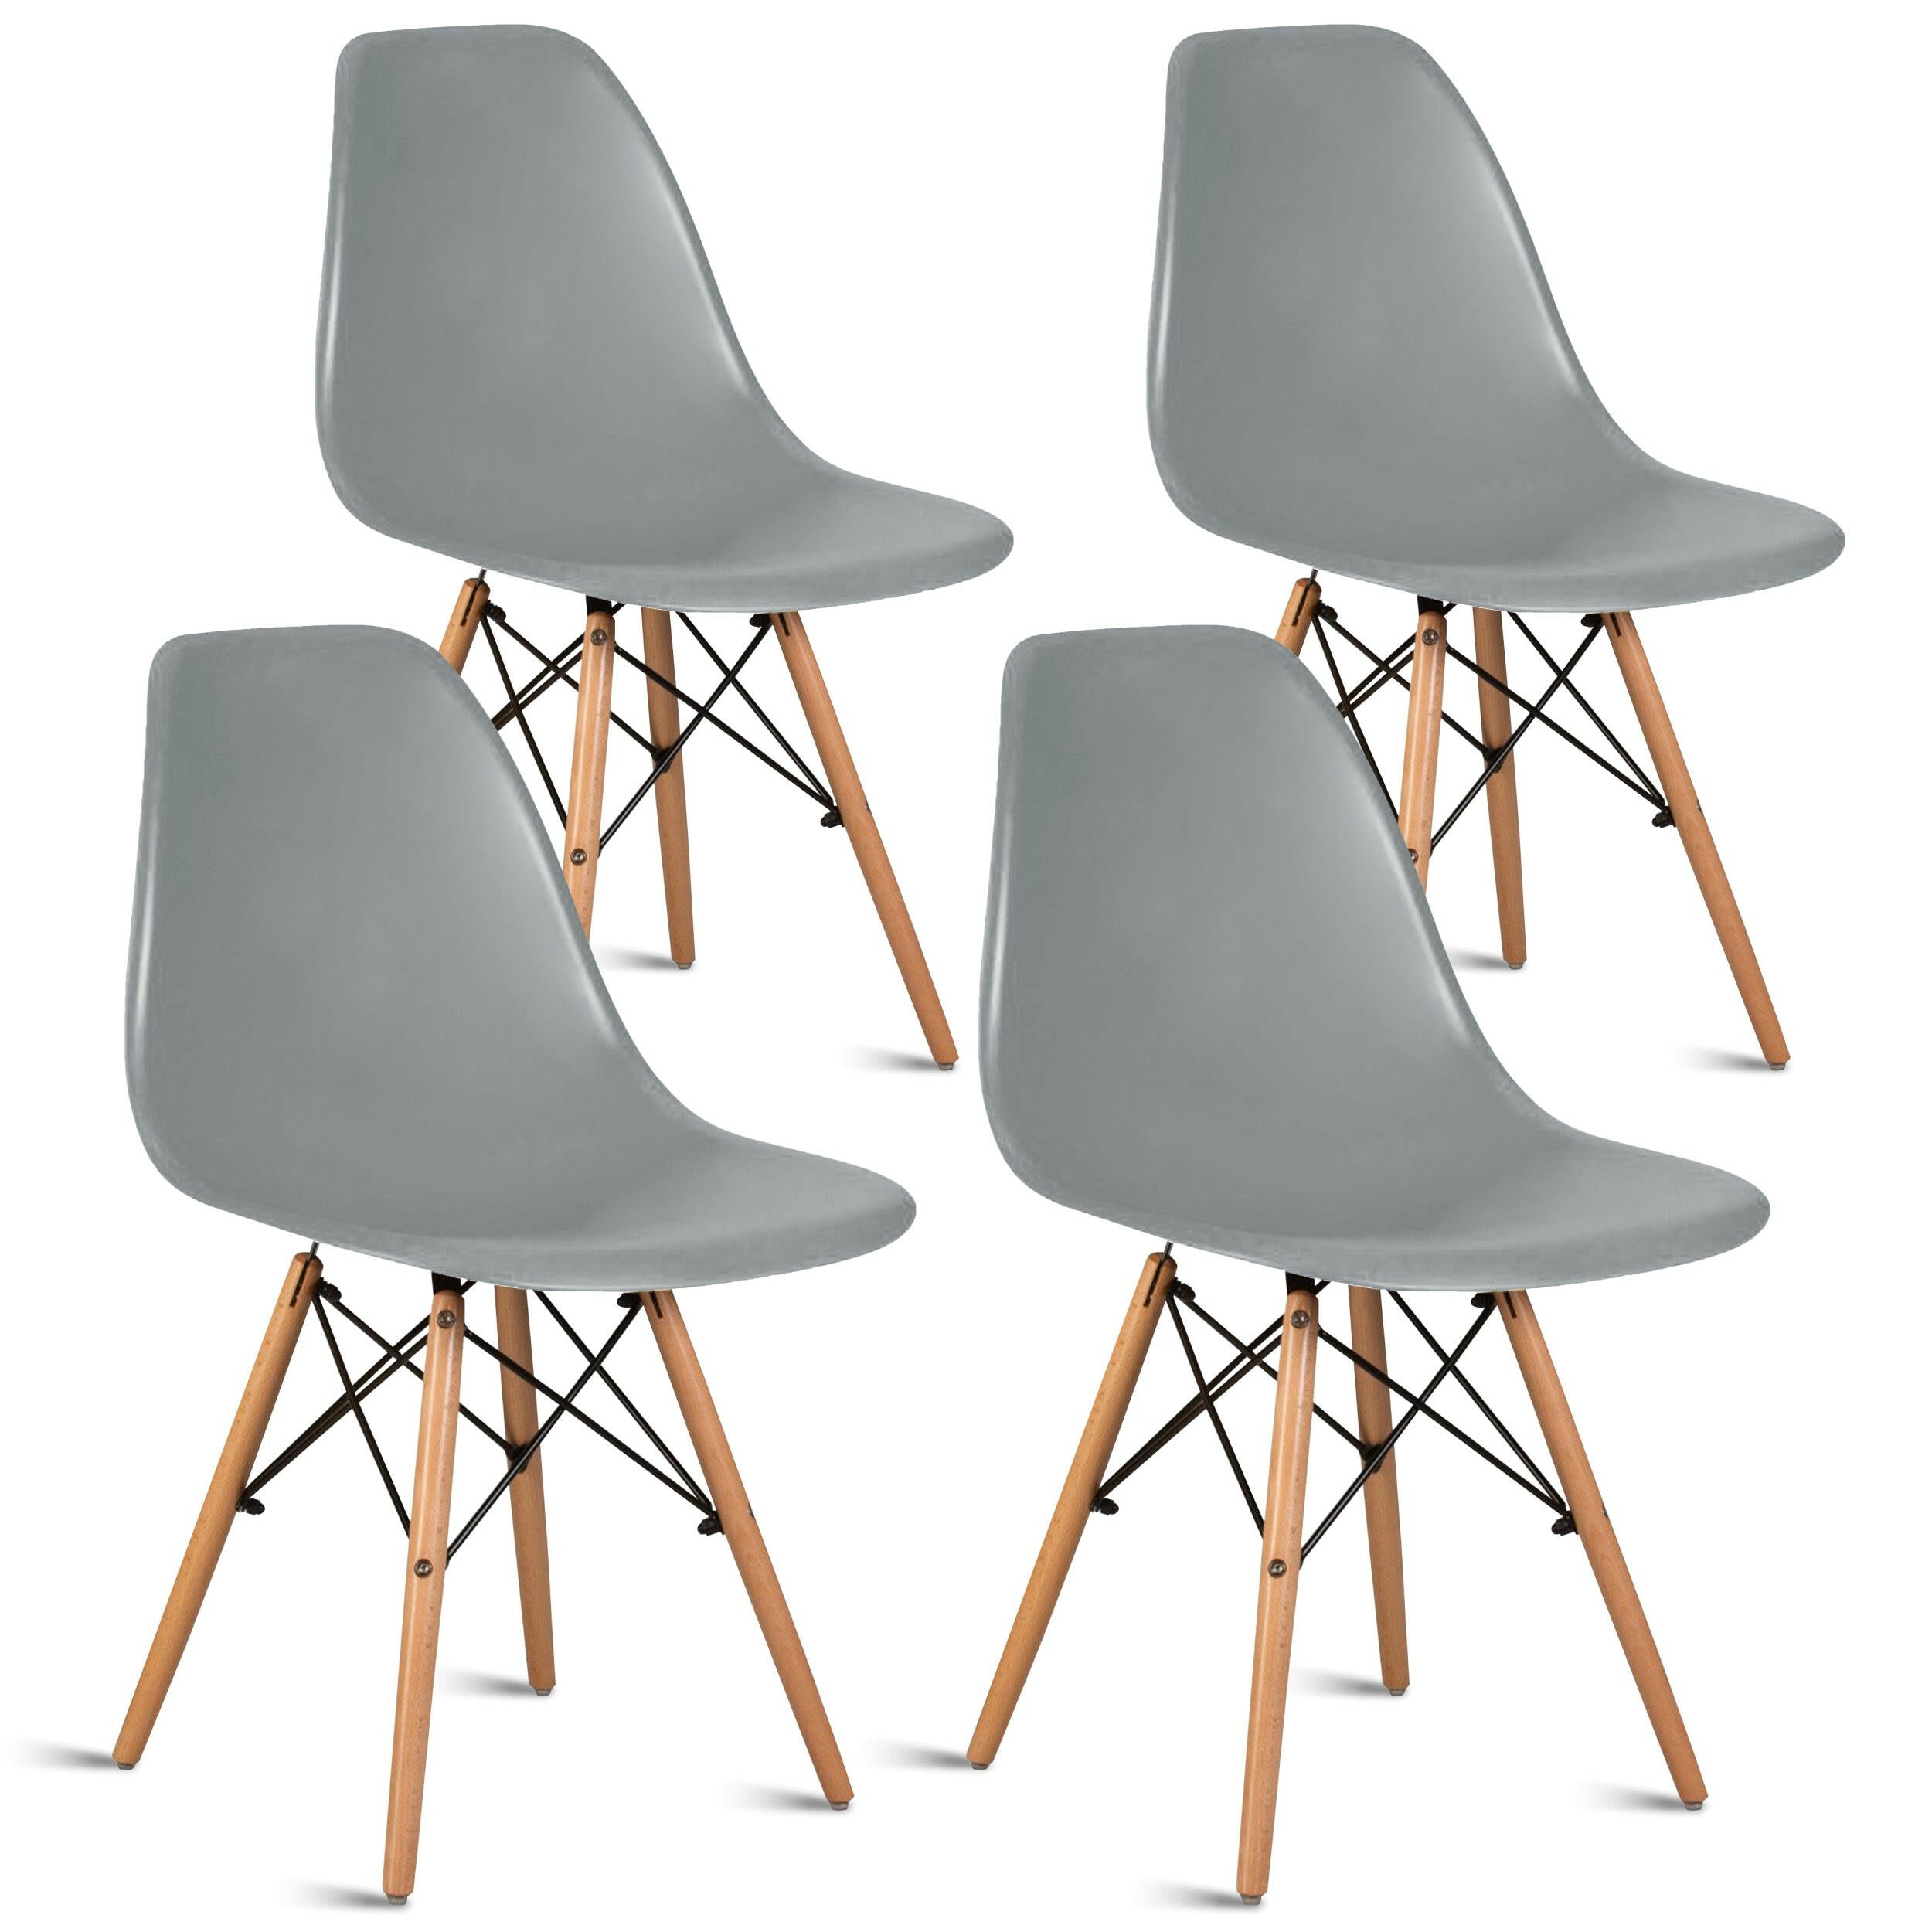 Set of 4 colorful retro dining chairs